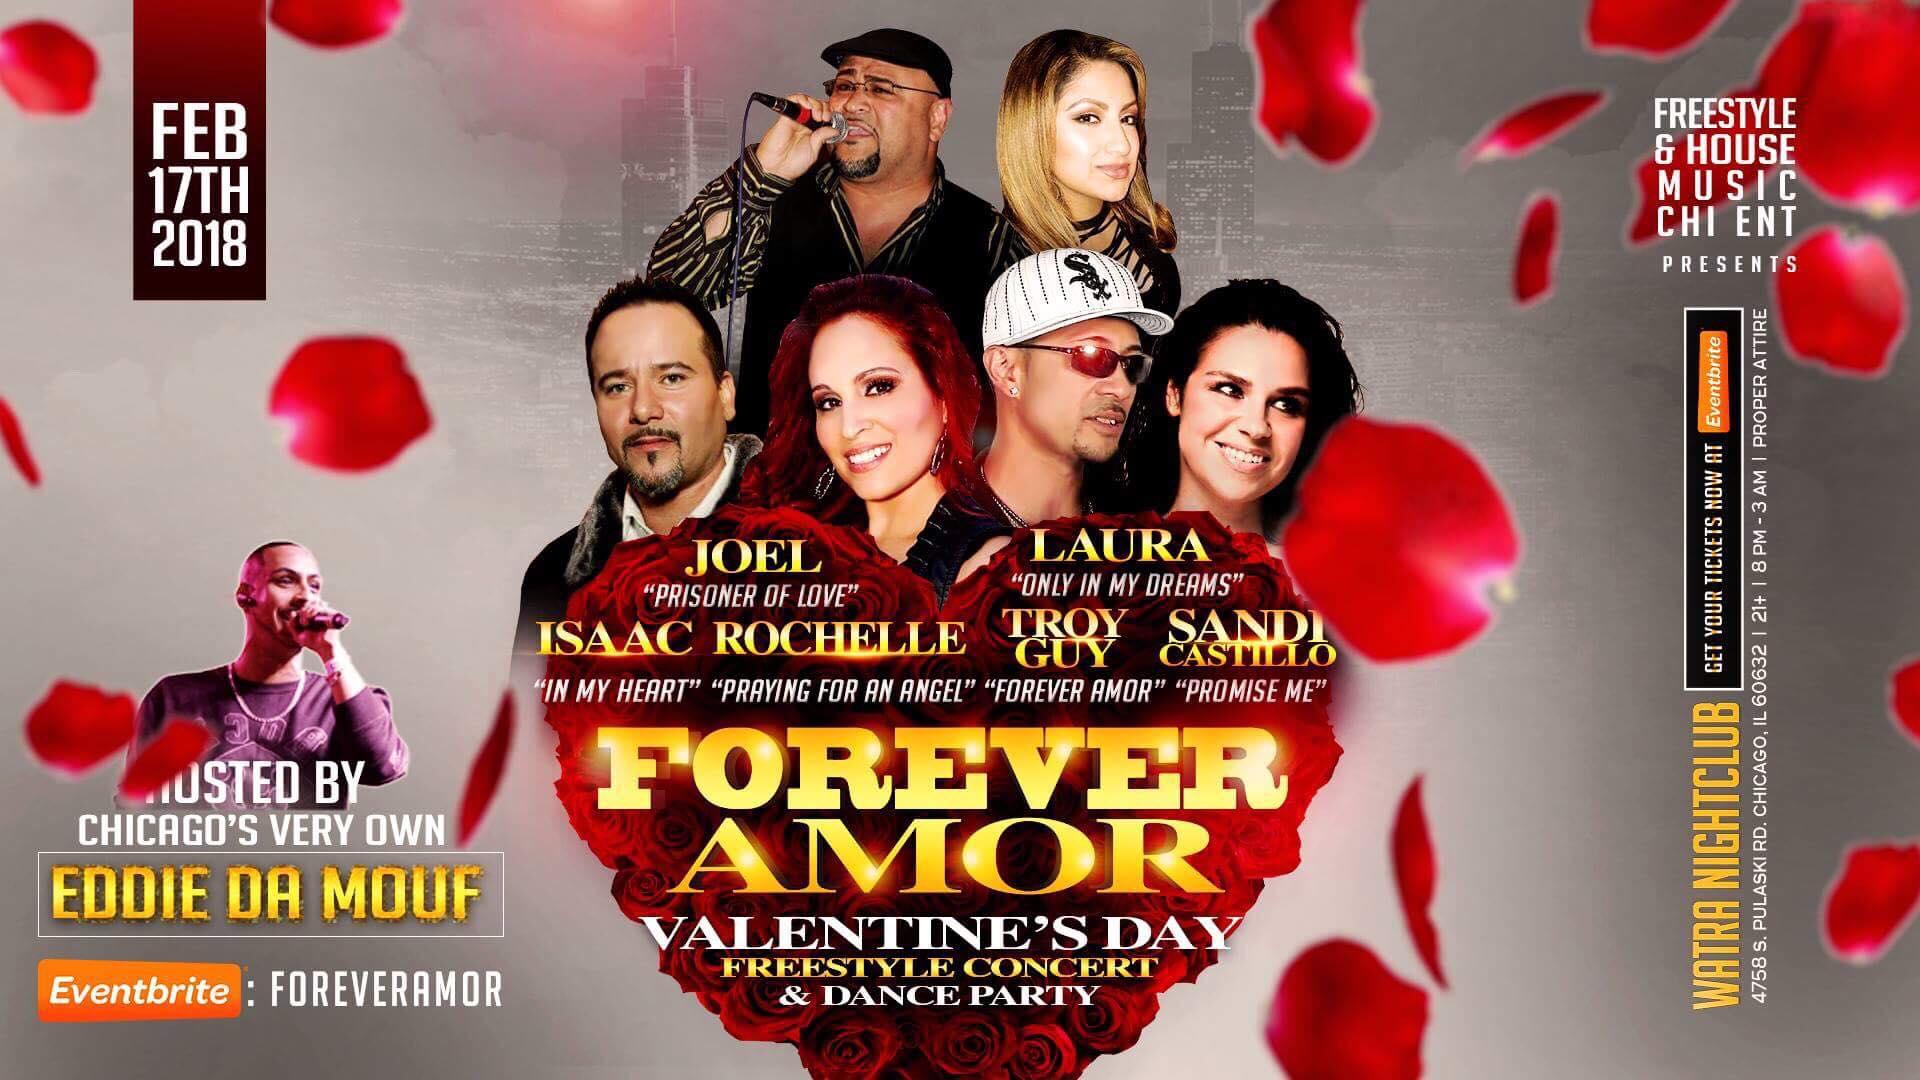 FOREVER AMOR VALENTINE'S FREESTYLE CONCERT & DANCE PARTY